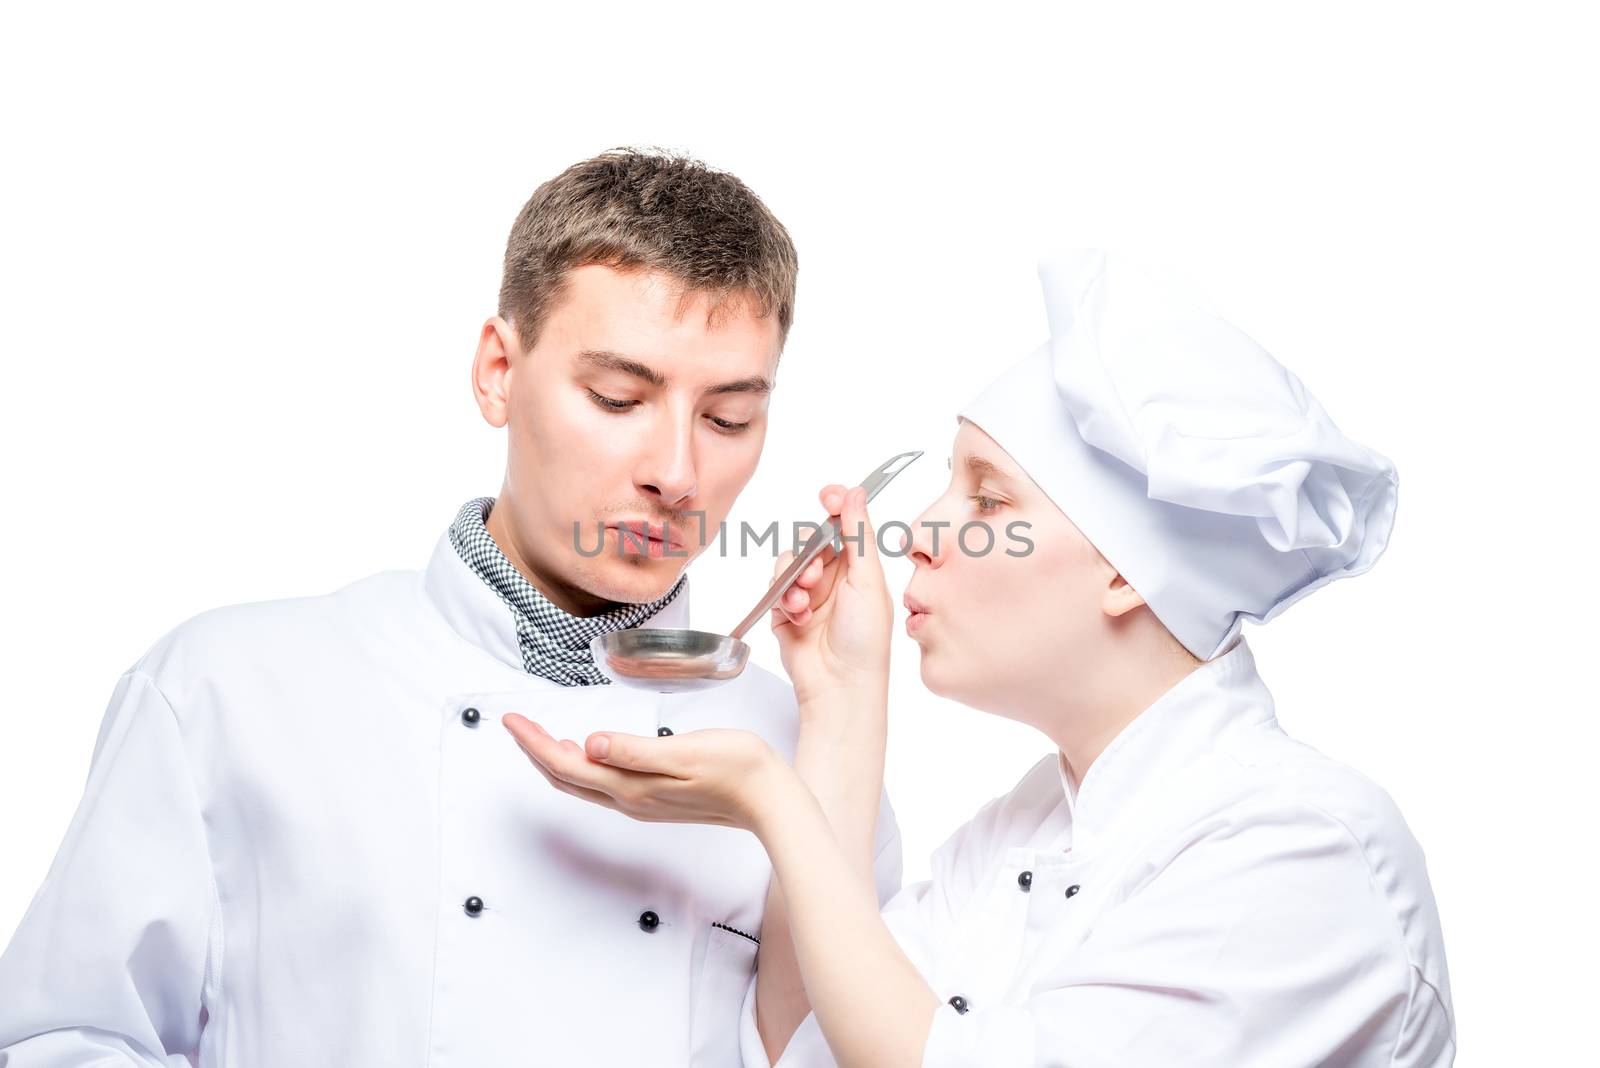 professional chefs try soup from a ladle on a white background